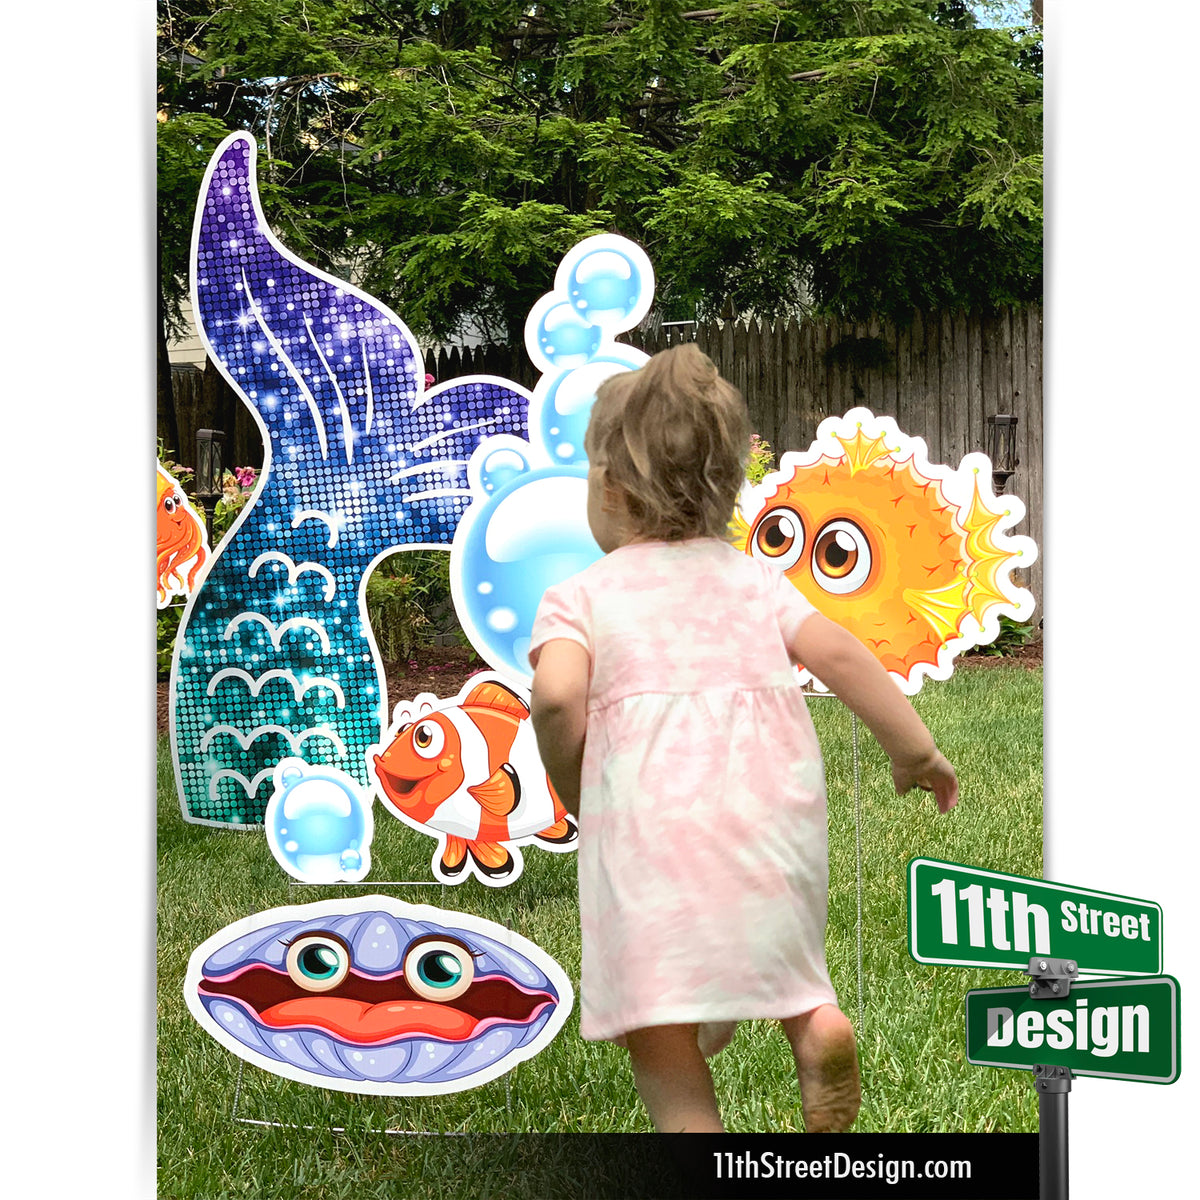 Personalized Mermaid Theme Birthday Party Decorations, Yard Card Lawn Signs With Photo Frame 0002